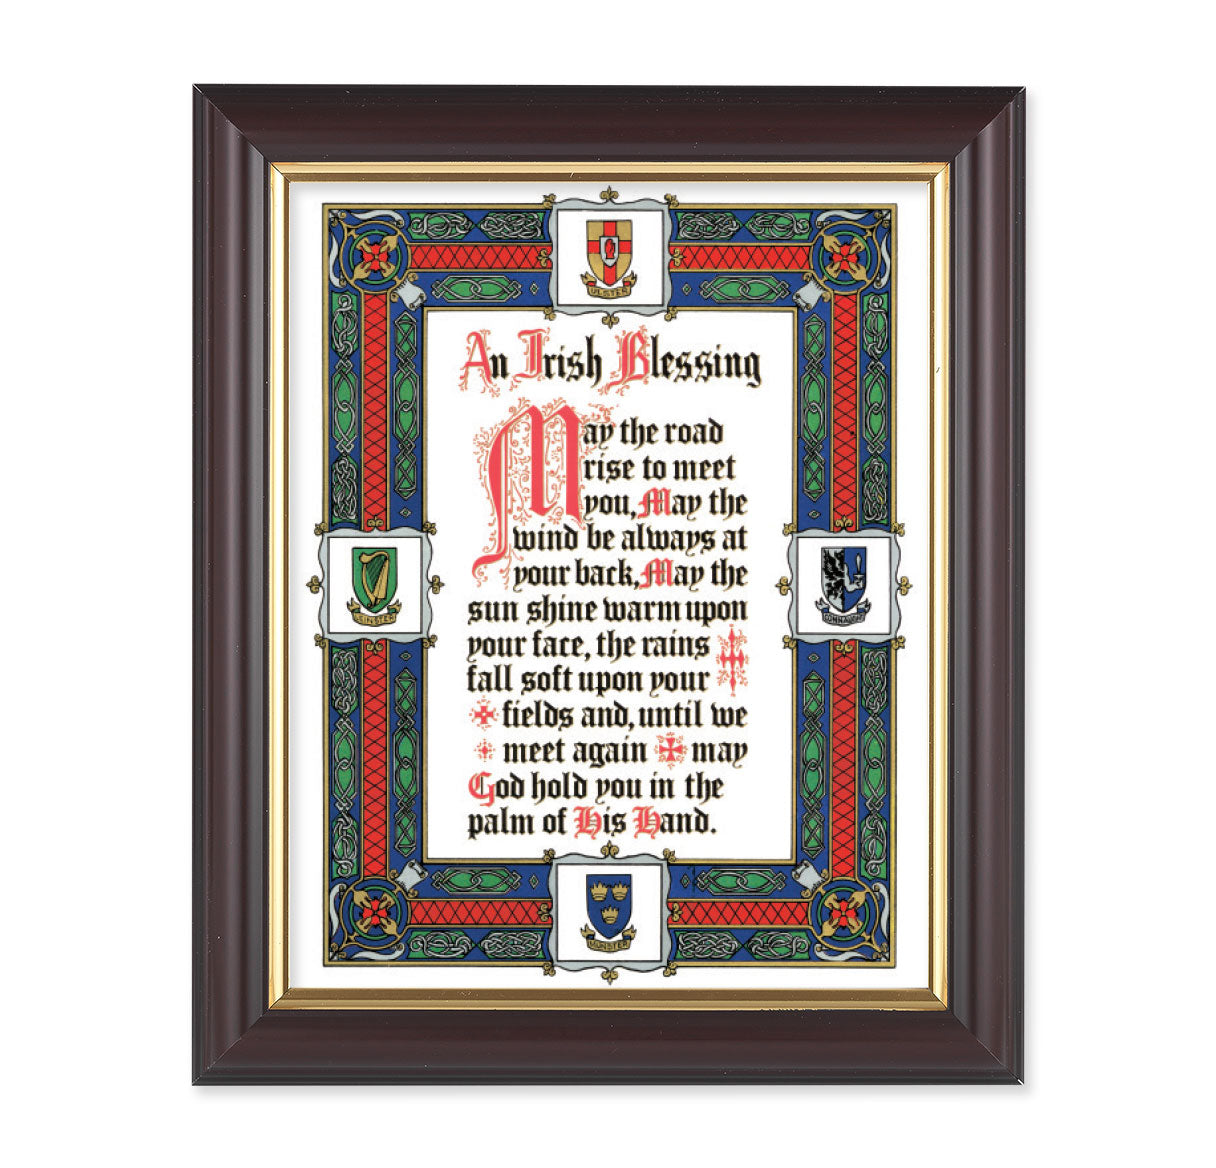 Irish Blessing Picture Framed Wall Art Decor Medium, Classic Fluted Dark Walnut Finished Frame with Gold-Leaf Lip